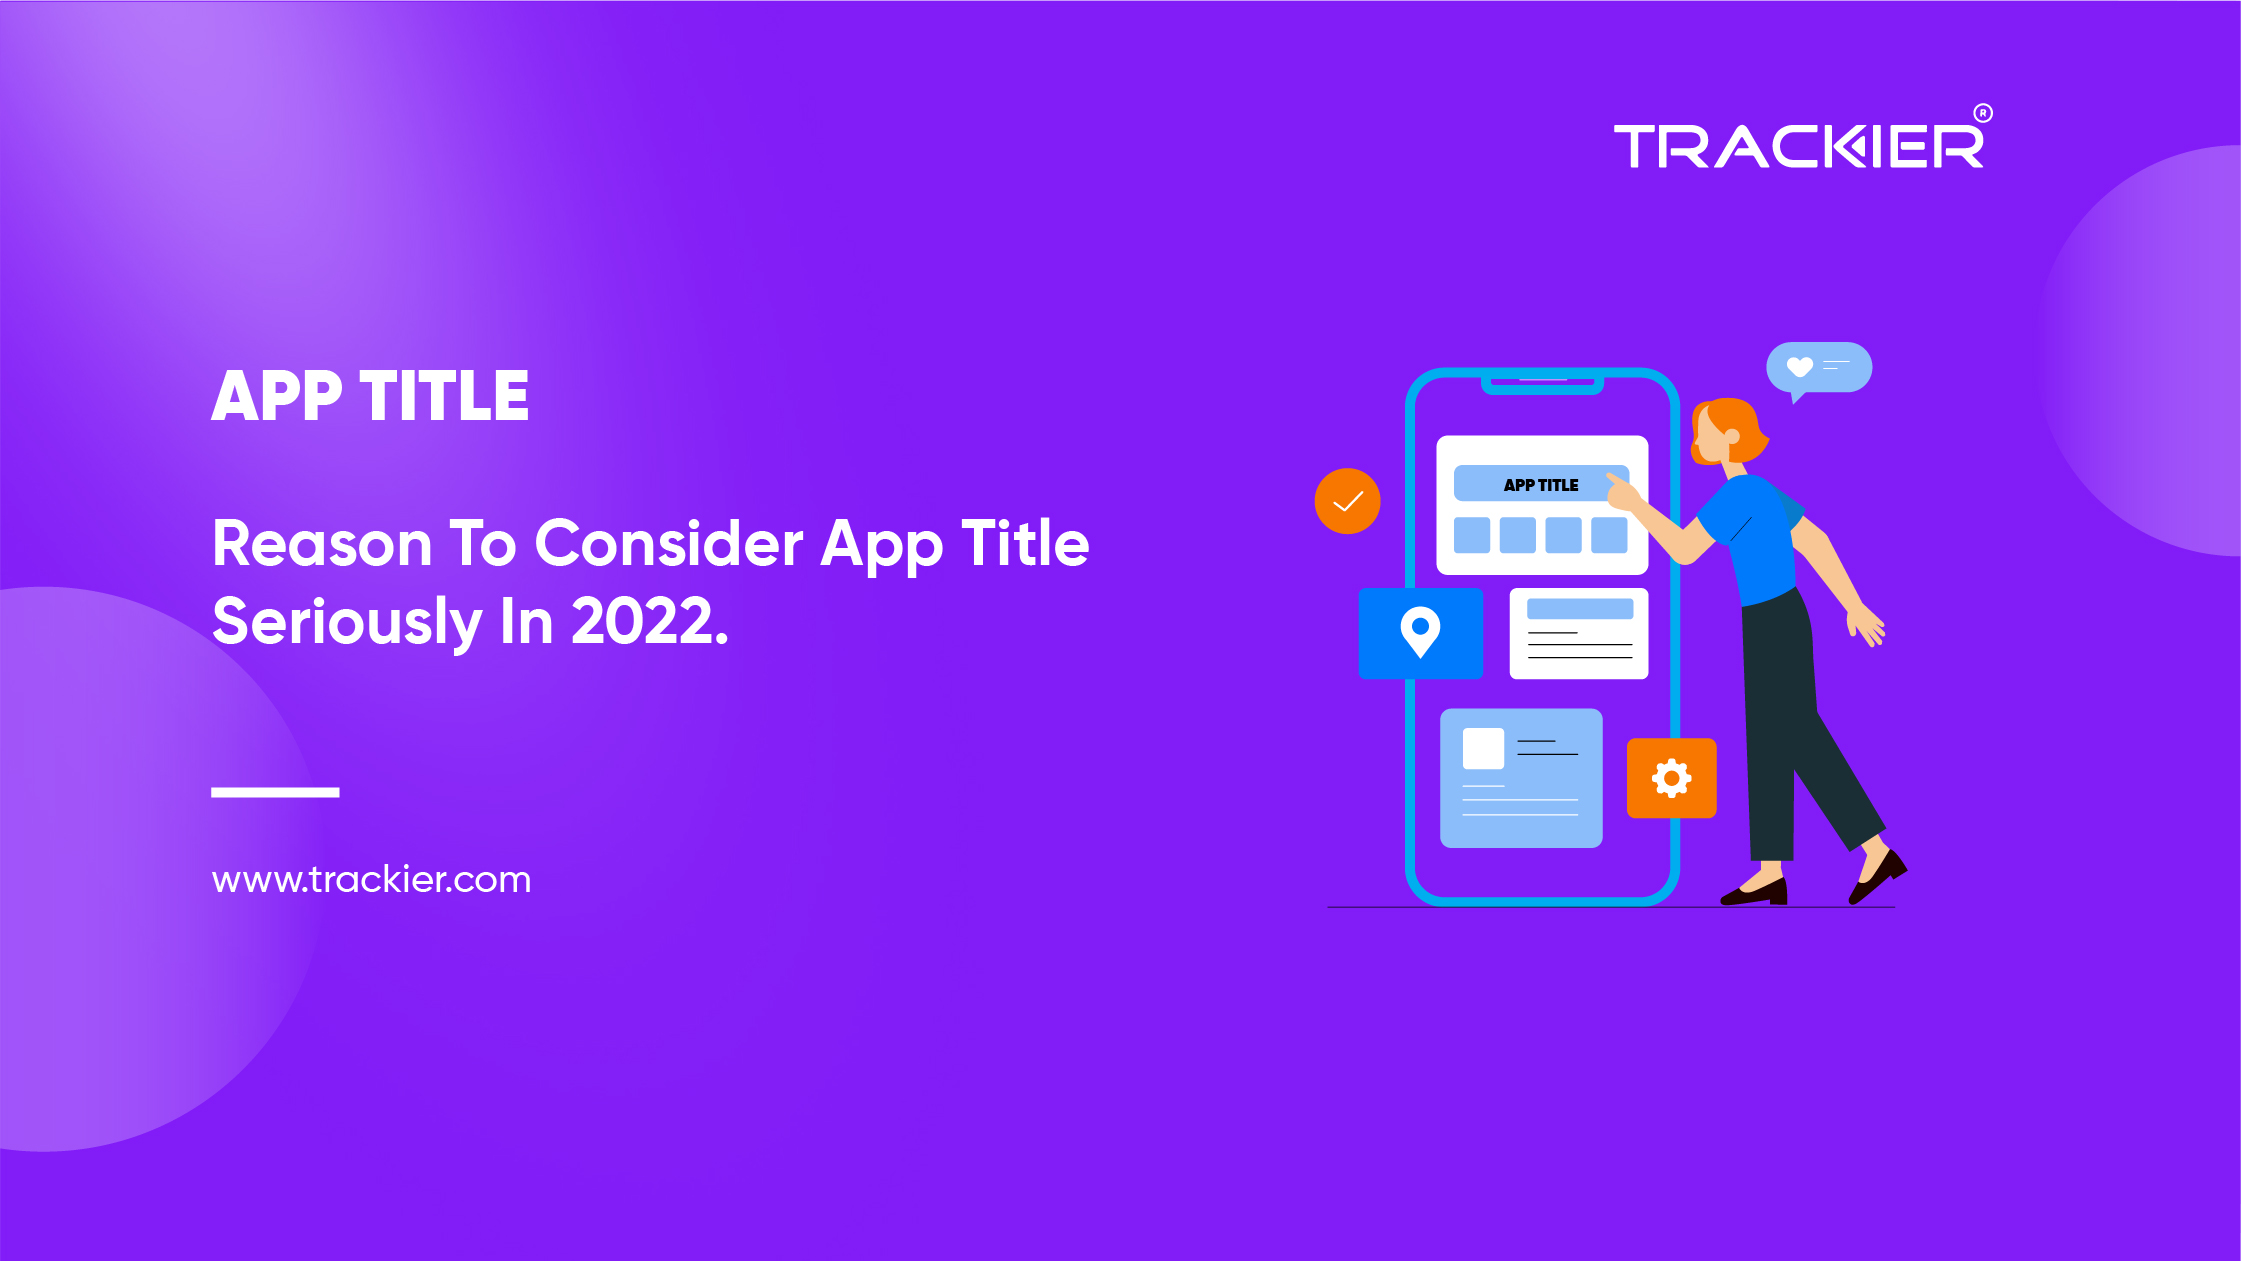 5 Best Exercises To Make App Title Work In 2022